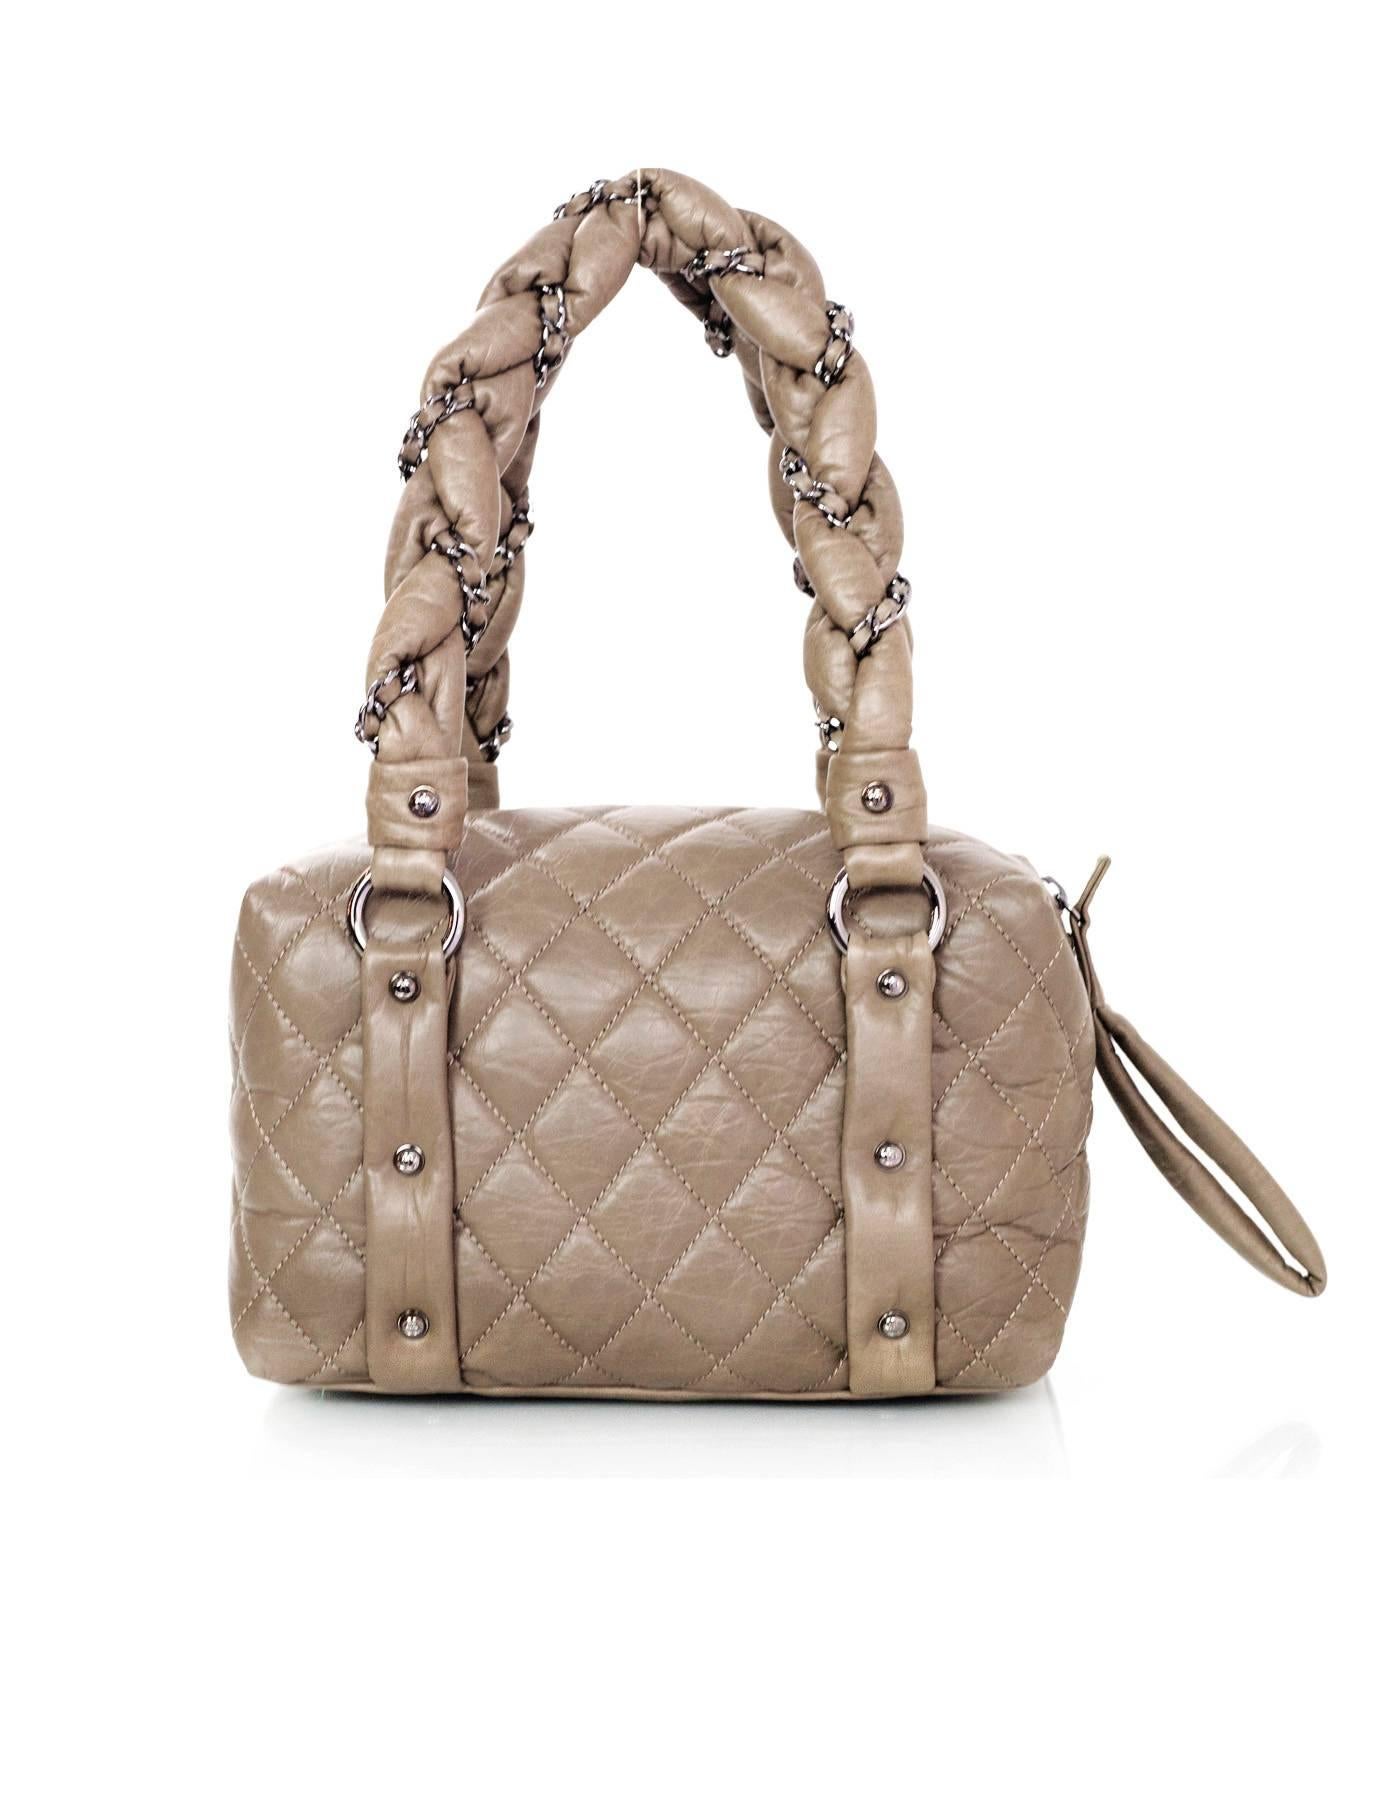 Brown Chanel Taupe Quilted Leather Lady Braid Satchel Bag